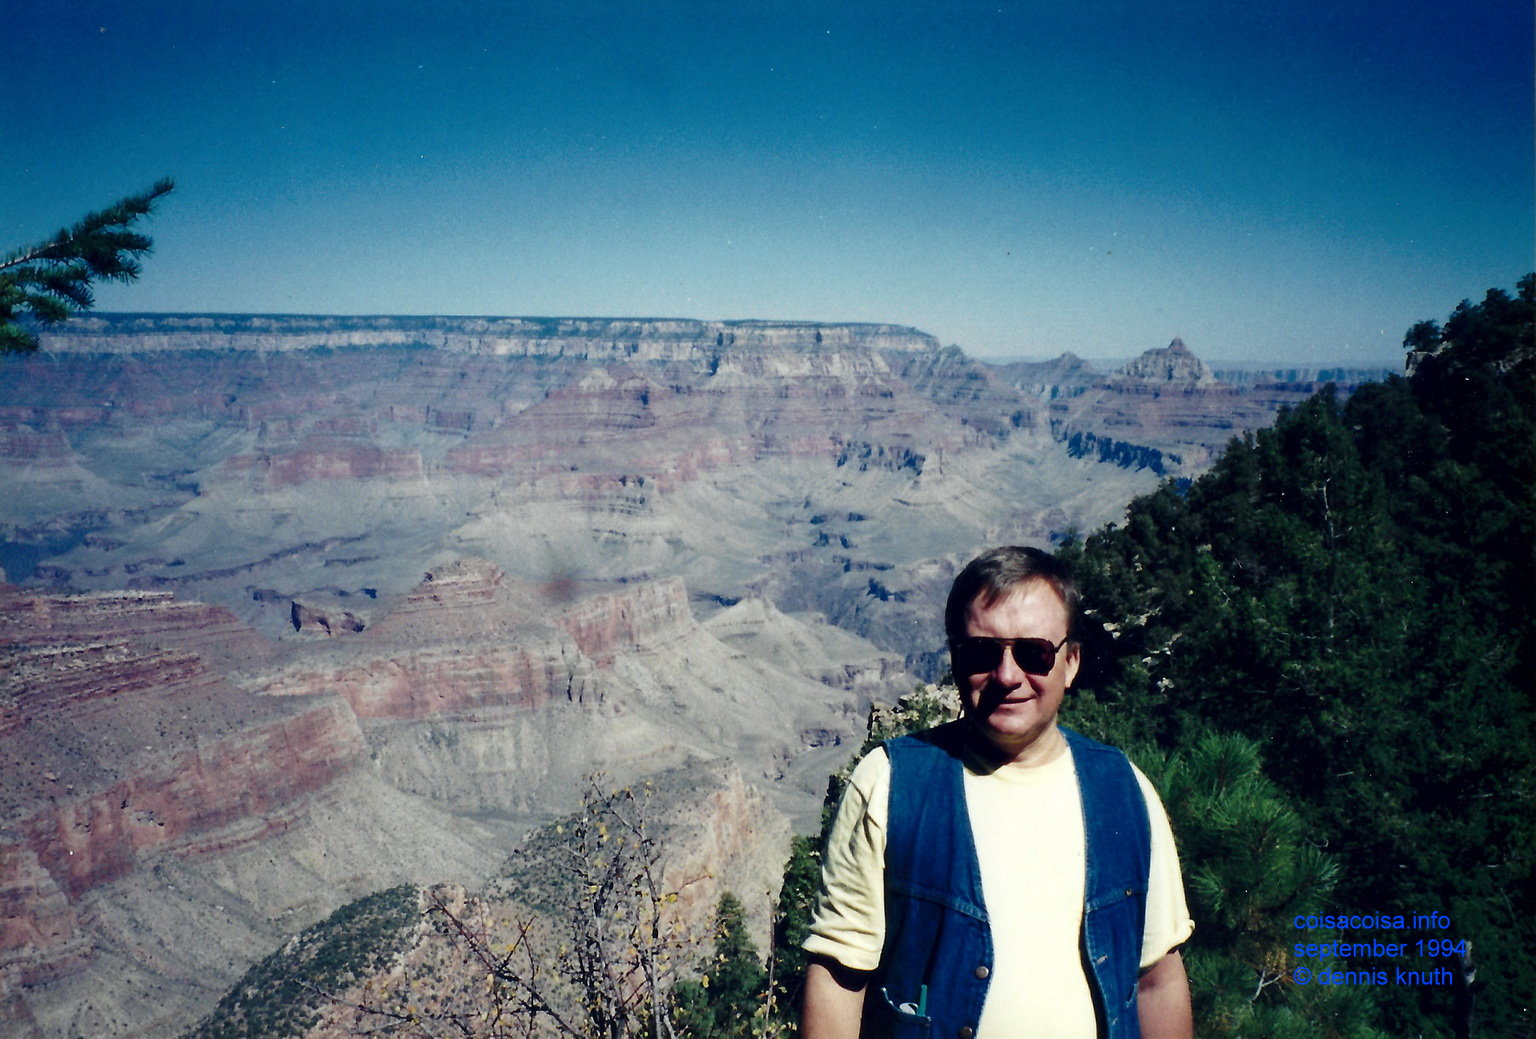 Dennis Knuth at the Grand Canyon in 1994